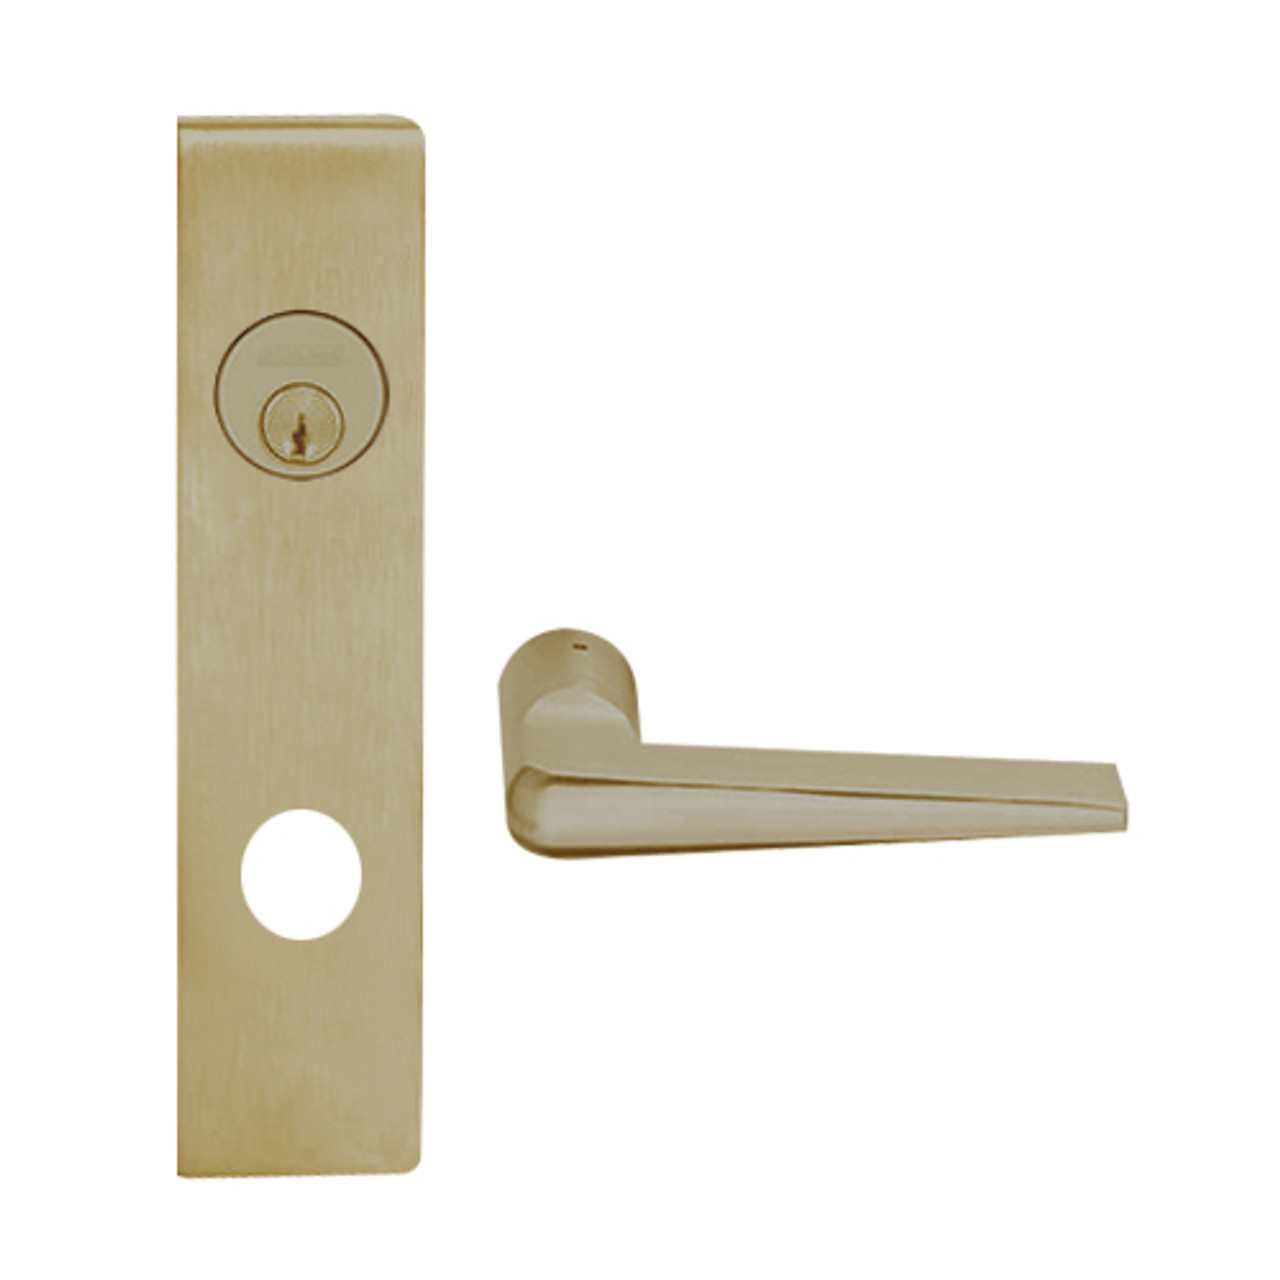 L9080L-05L-613 Schlage L Series Less Cylinder Storeroom Commercial Mortise Lock with 05 Cast Lever Design in Oil Rubbed Bronze